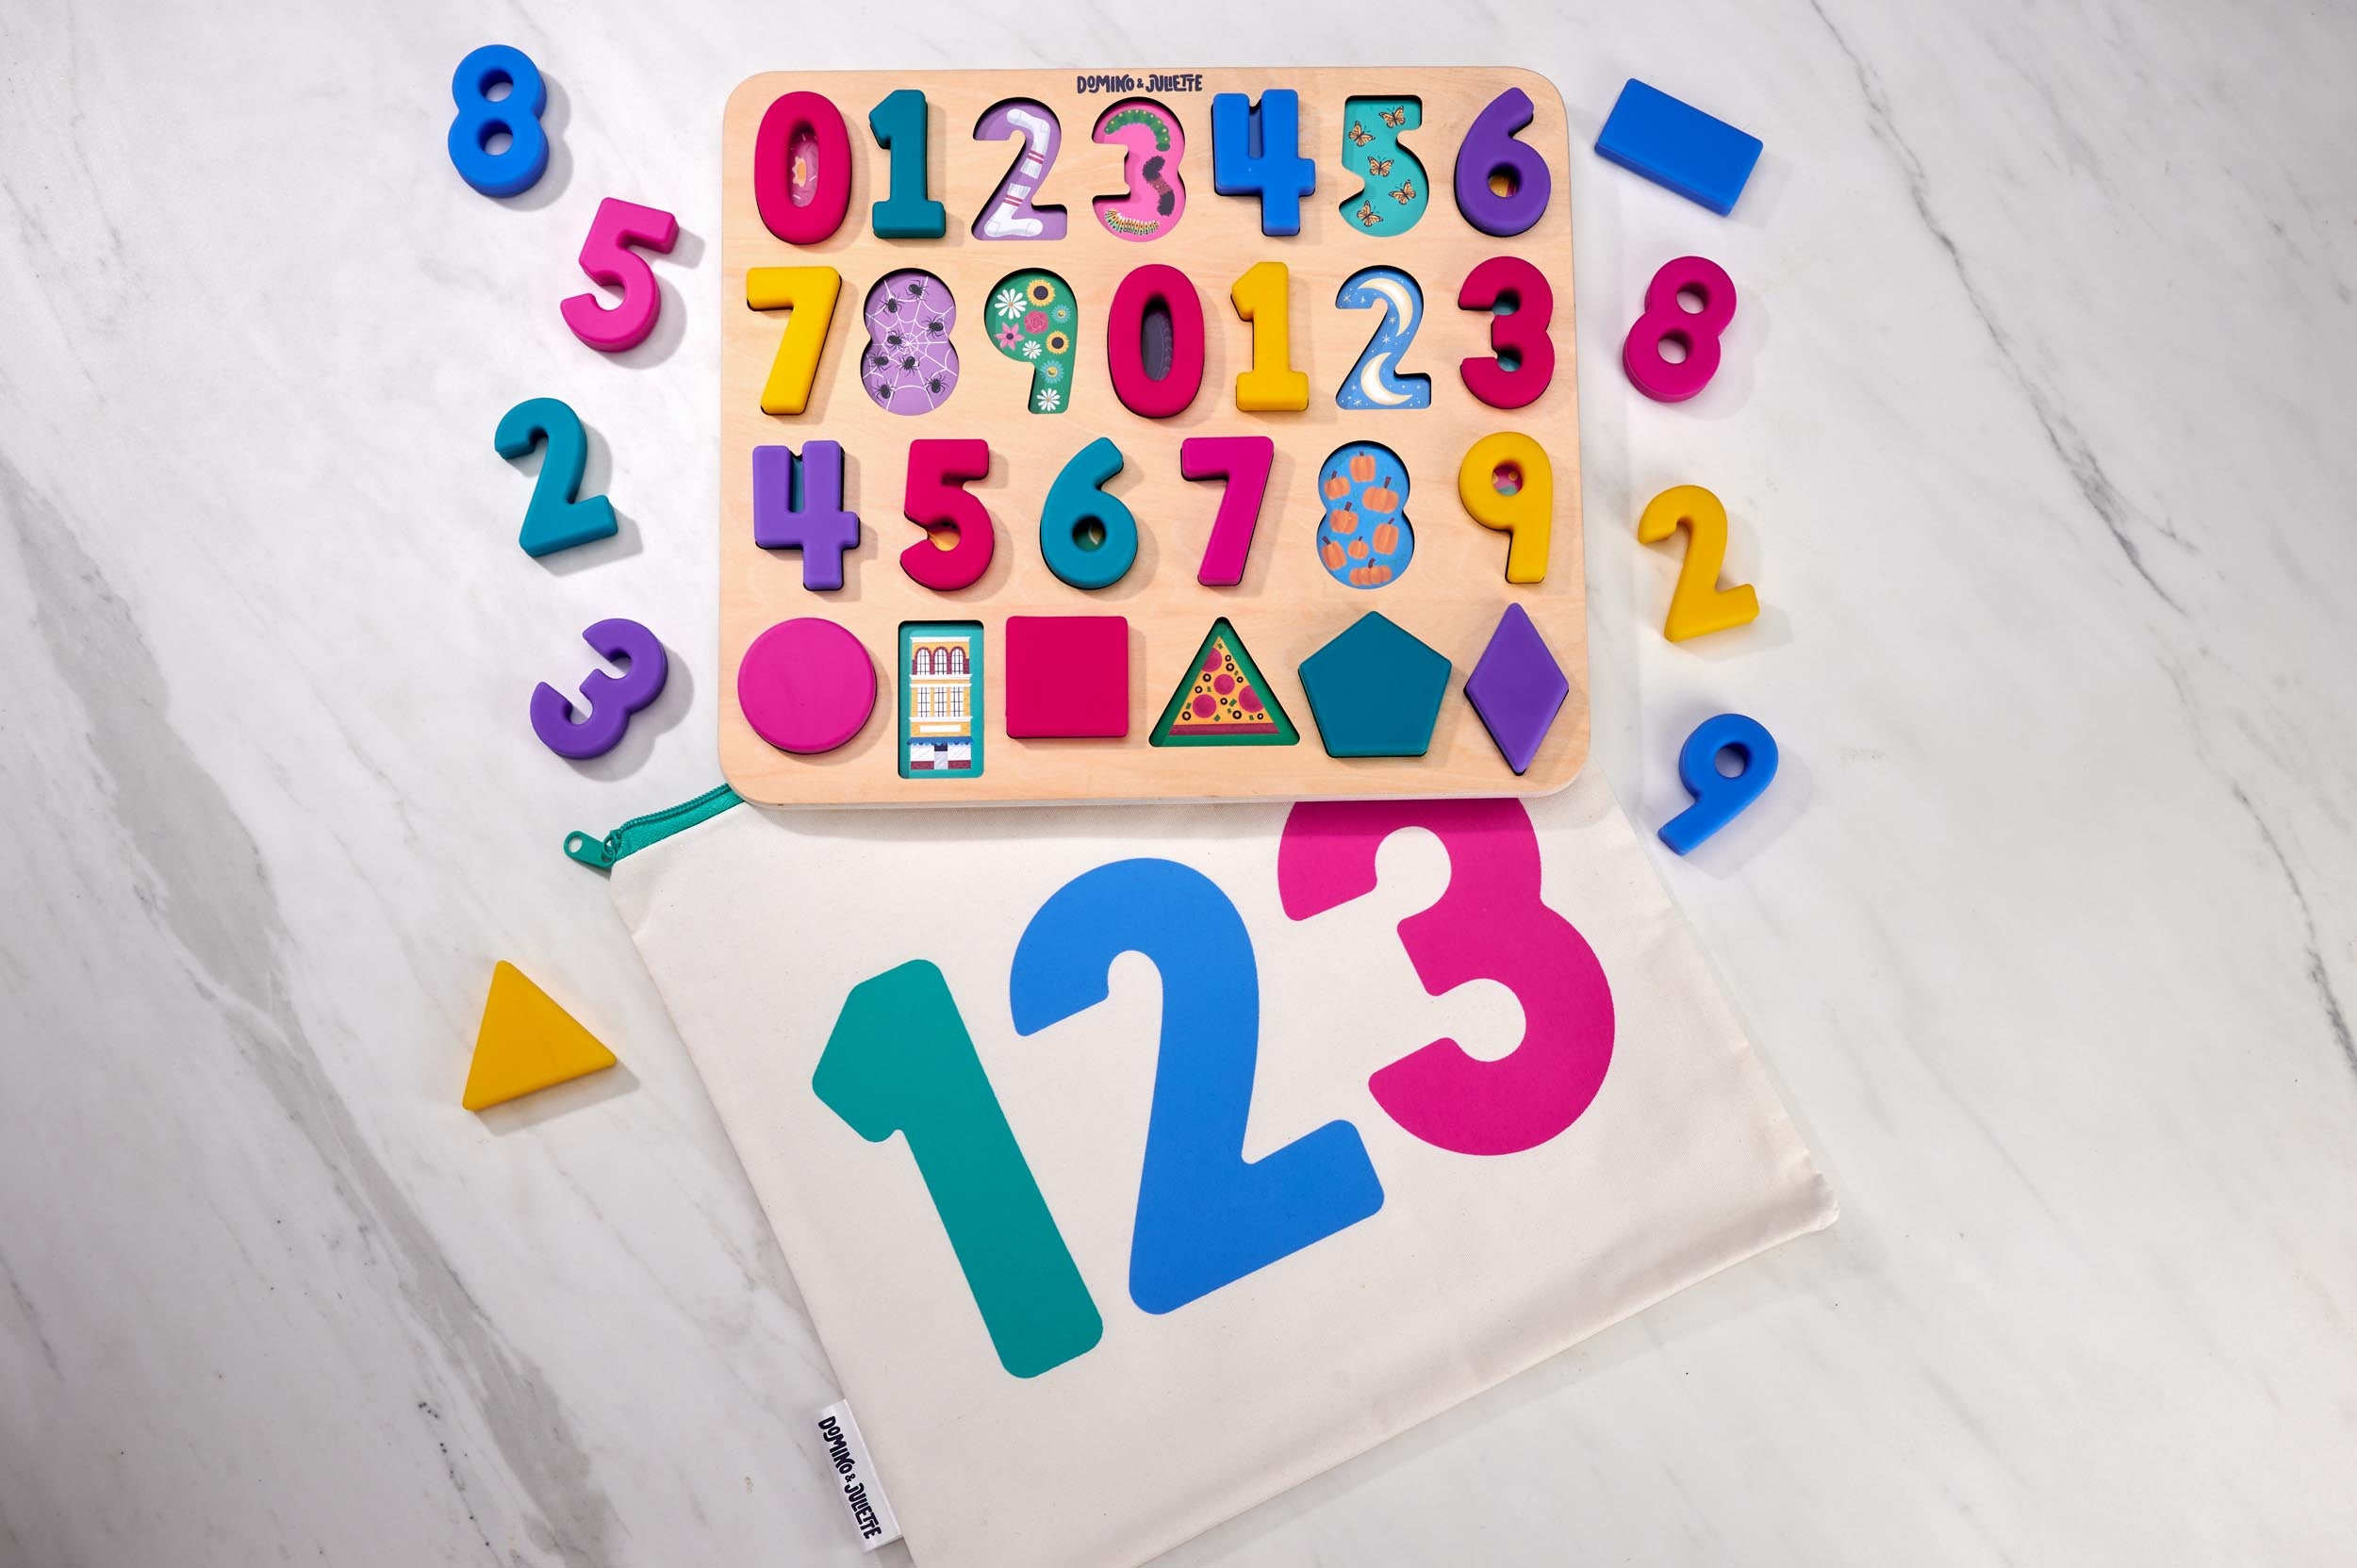 Numeric Puzzle Board, Number Puzzle Board, ABC Puzzle Board, Alphabet Puzzle Board, 123 Puzzle Board, Puzzle Board, Kids Puzzle board, Wooden Alphabet Puzzle Board, Silicone Puzzle Pieces, Seek and Sort Puzzle, Educational Toy, Number Recognition toy for kids, Shape Recognition toy for kids, Counting toys for kids, Safe puzzles for Kids, Toy Library, Age-appropriate Puzzles, Preschoolers, 2-year-olds, Indoor Activities for 4-year-olds, Daycare Activities, Fun and Engaging Sensory Experience.